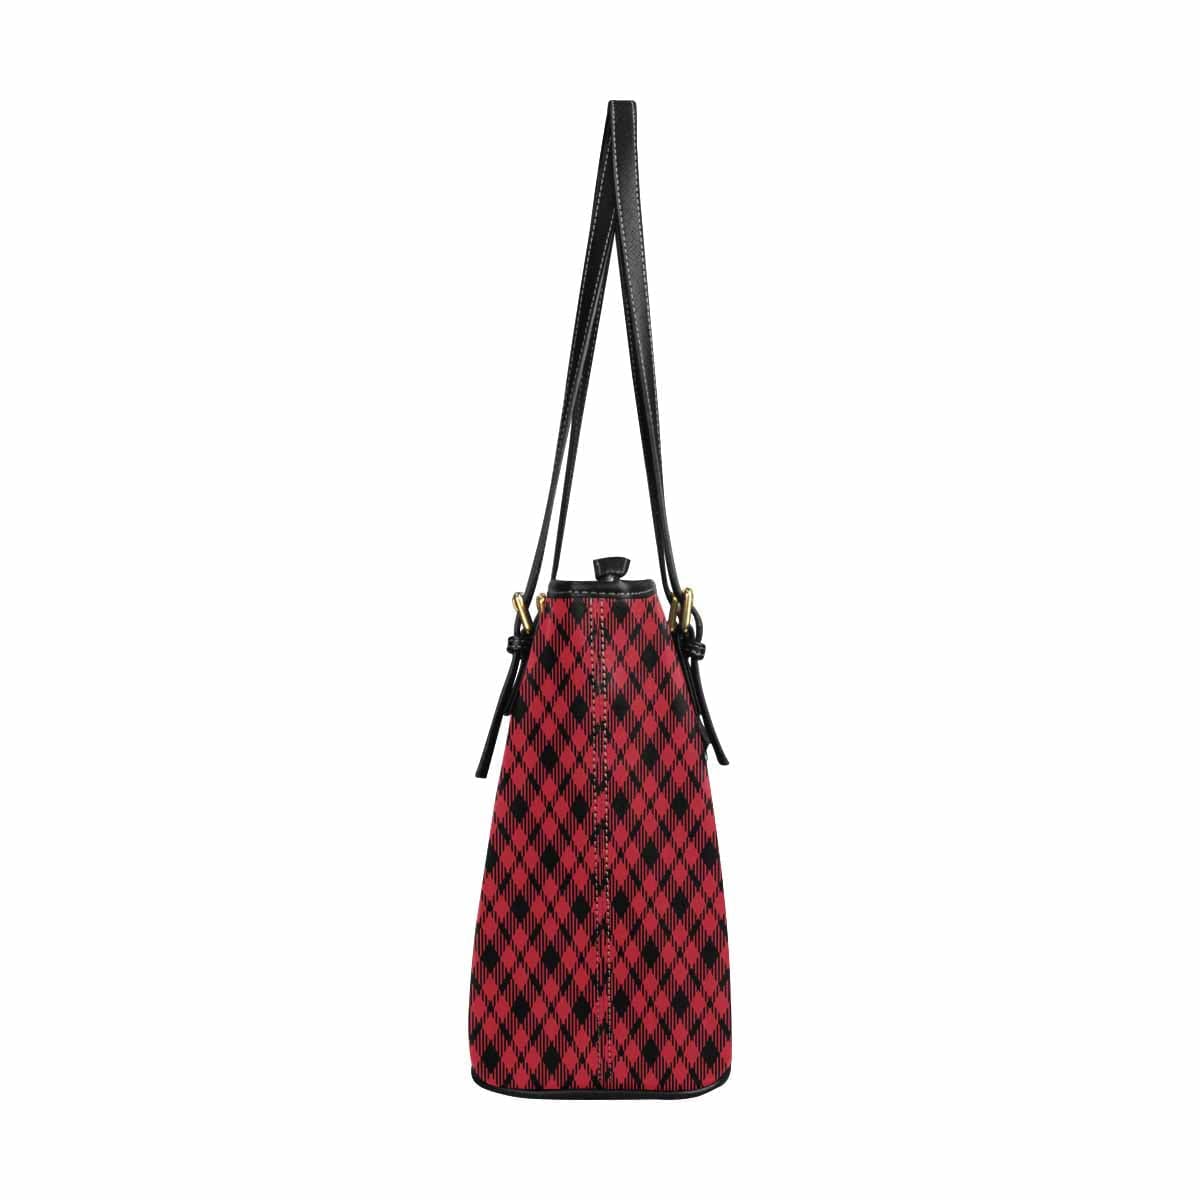 Large Leather Tote Shoulder Bag - Buffalo Plaid Red And Black S954653 - Bags